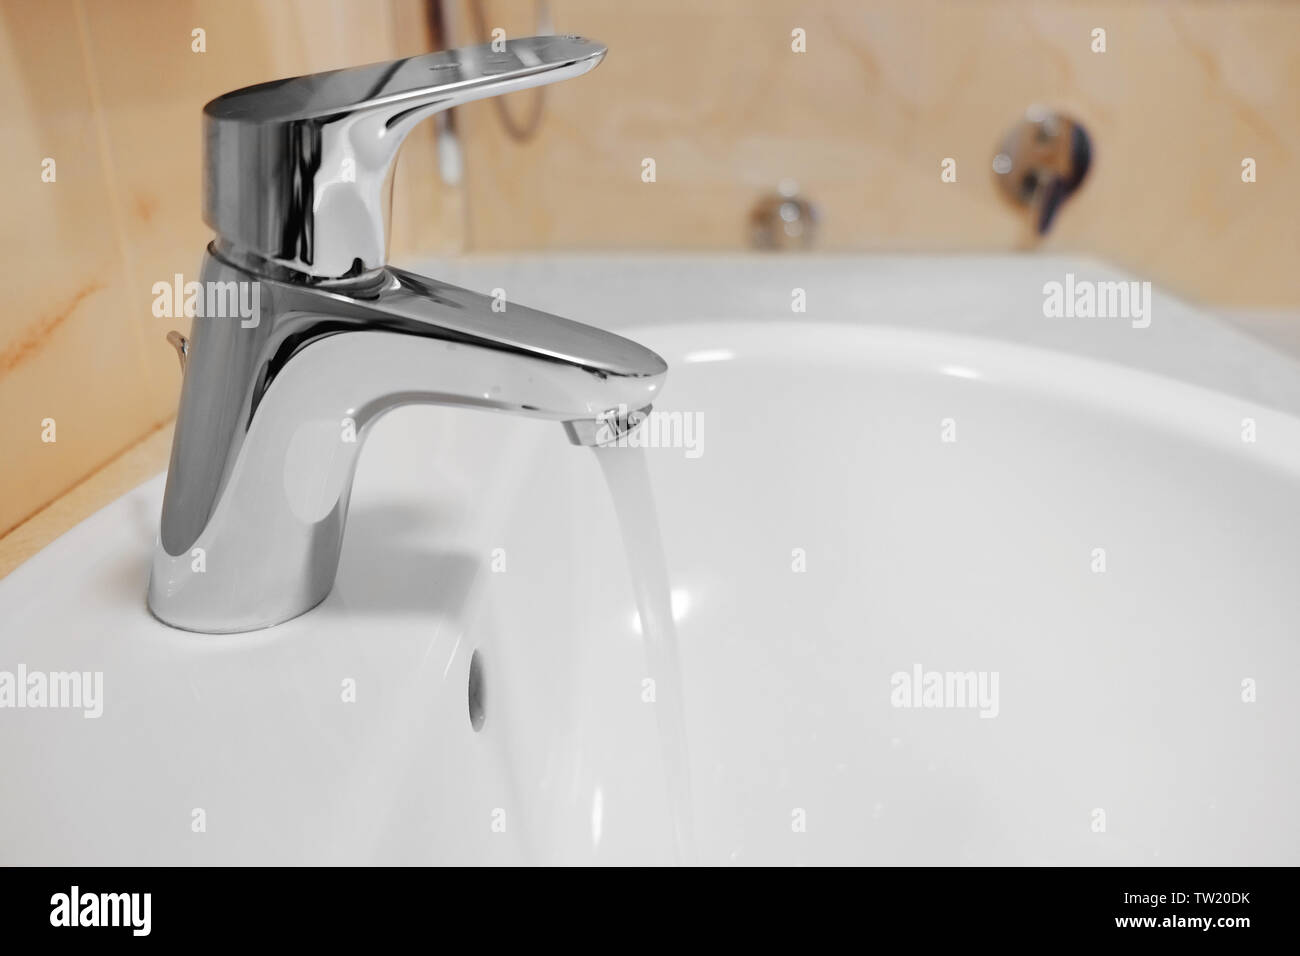 Clean Sink And Faucet In Hotel Bathroom Stock Photo 256355839 Alamy